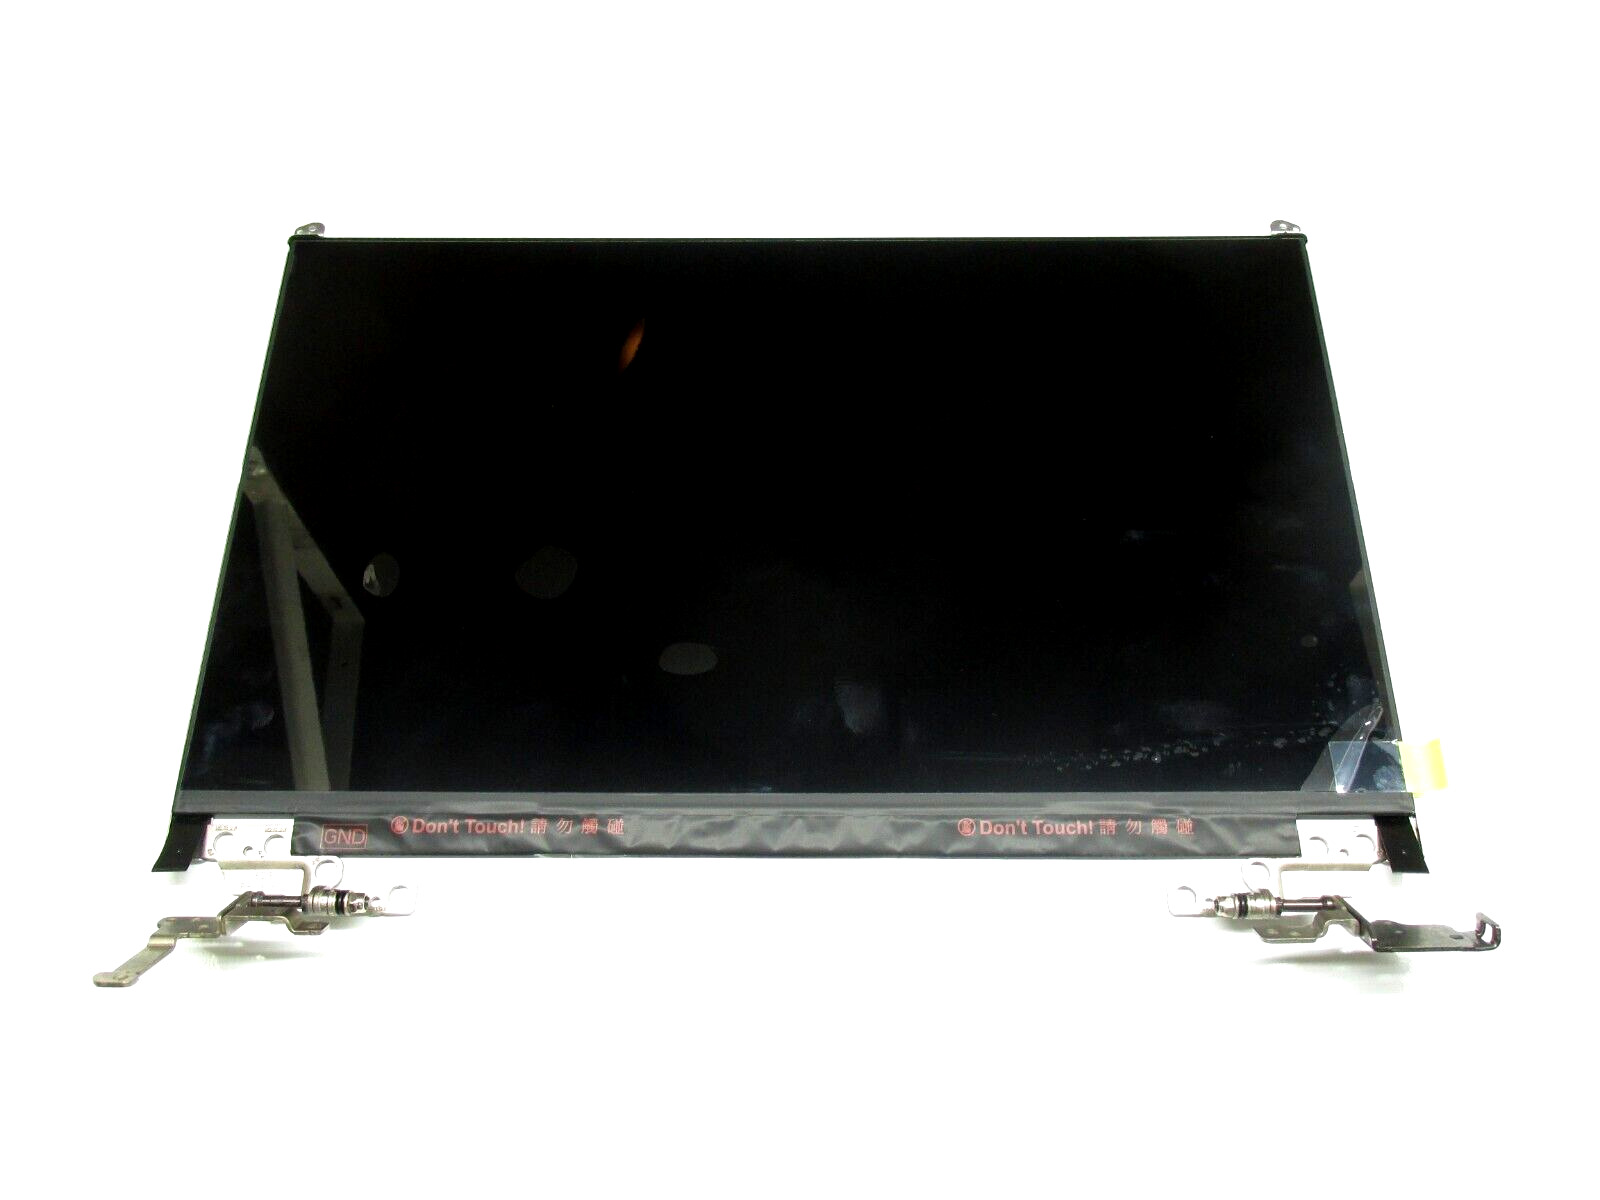 New OEM Dell Vostro 5581 FHD LCD Panel Matte with Hinges IVA01 K1MP9 DDCH3